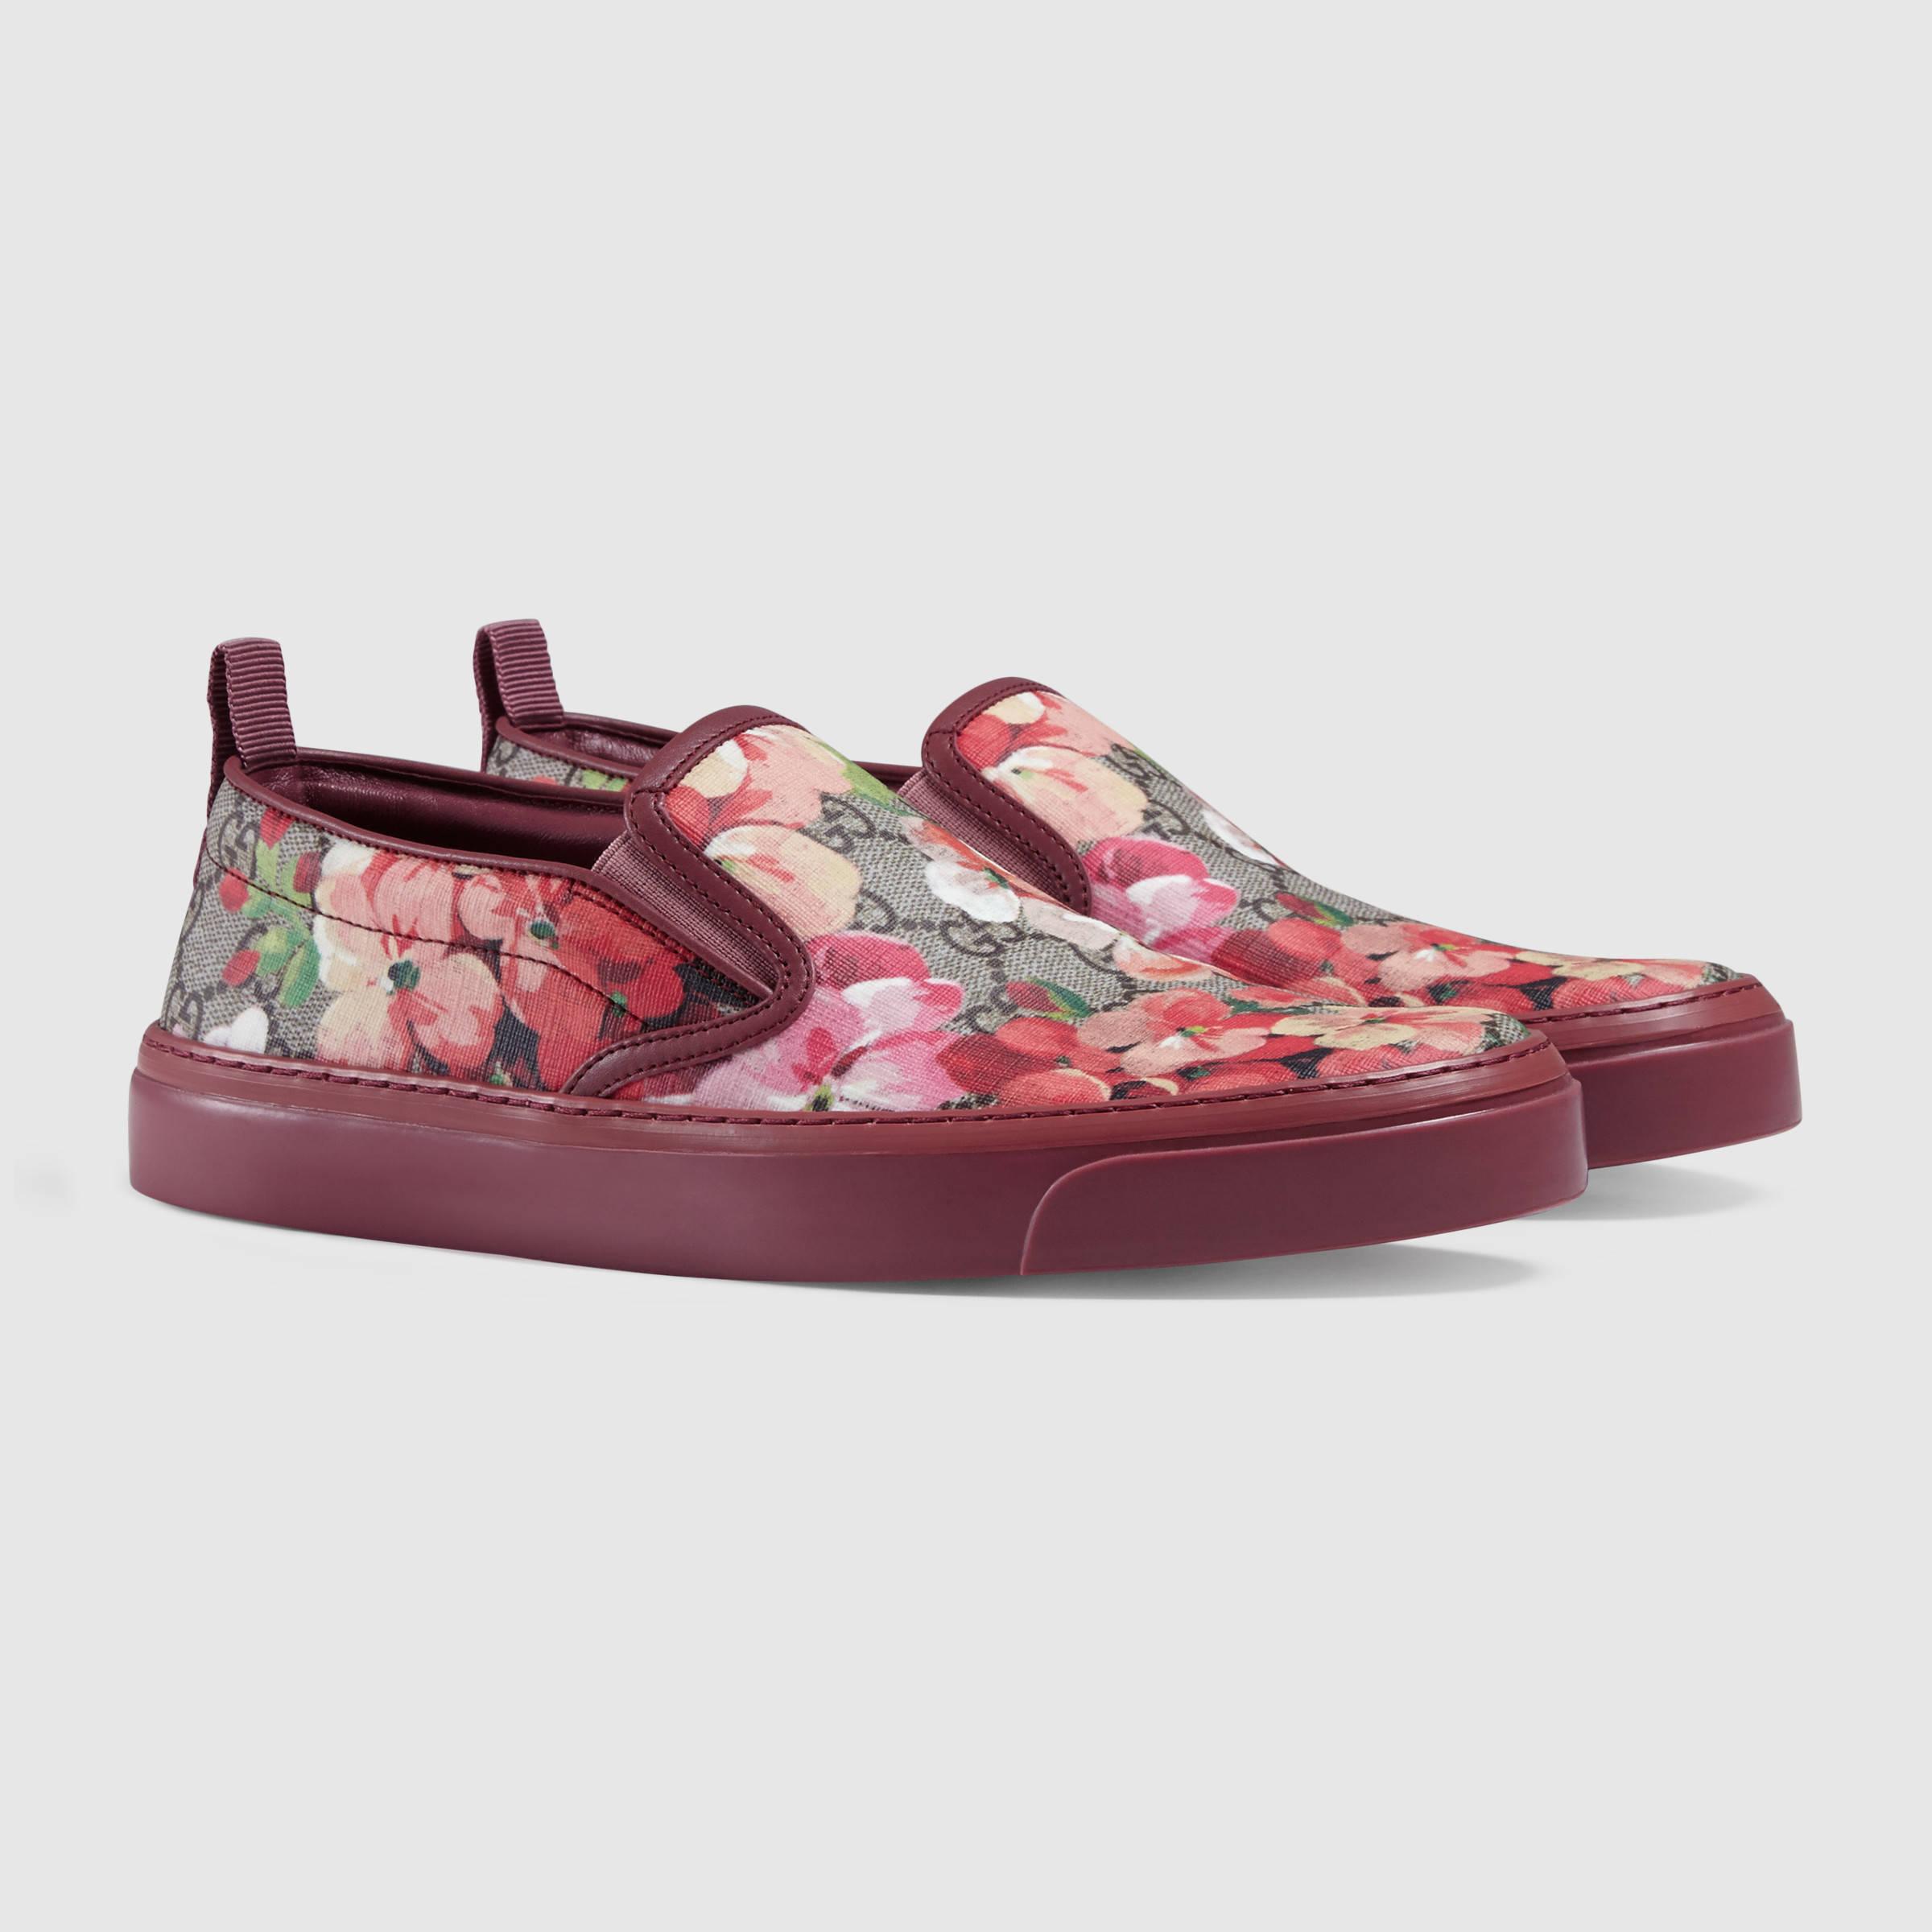 Gucci Canvas Blooms Print Slip-on Sneaker - Lyst